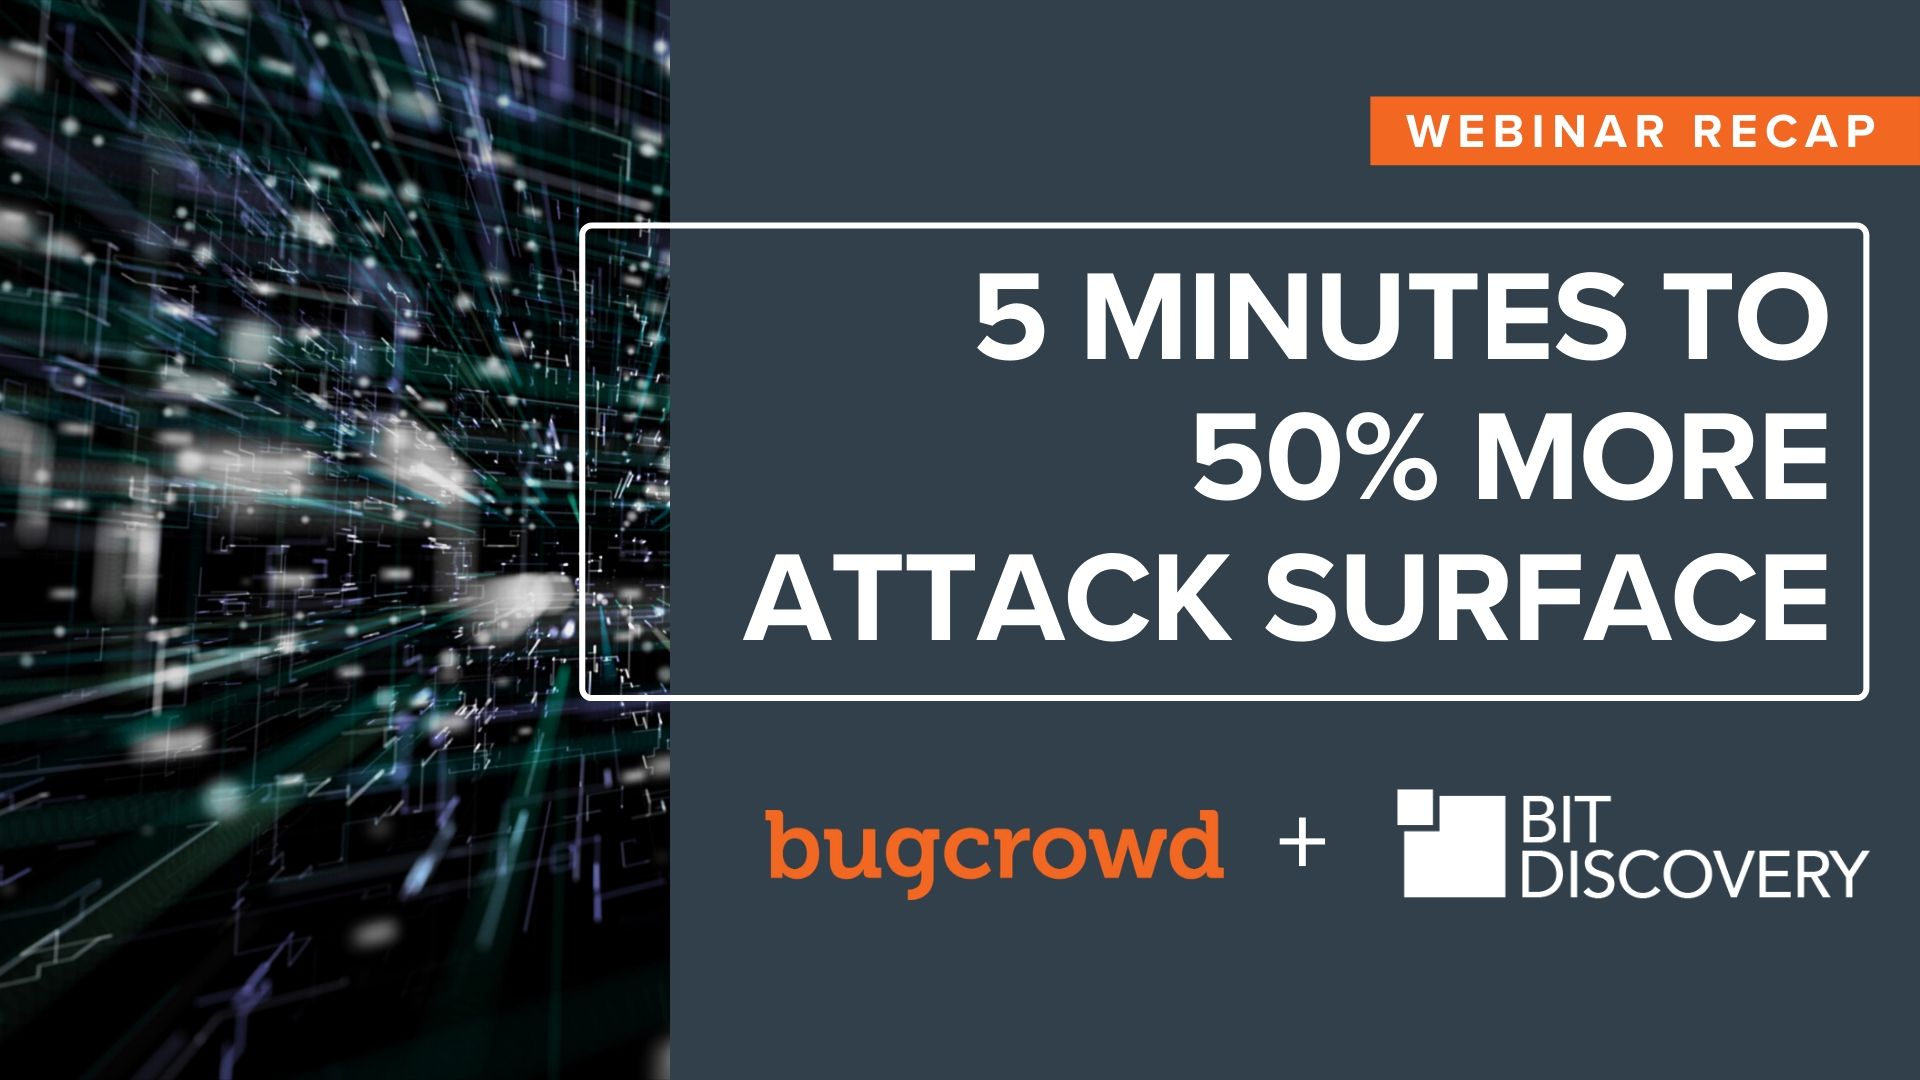 5 Things We Learned from the 5 Mins to 50% More Attack Surface Webinar